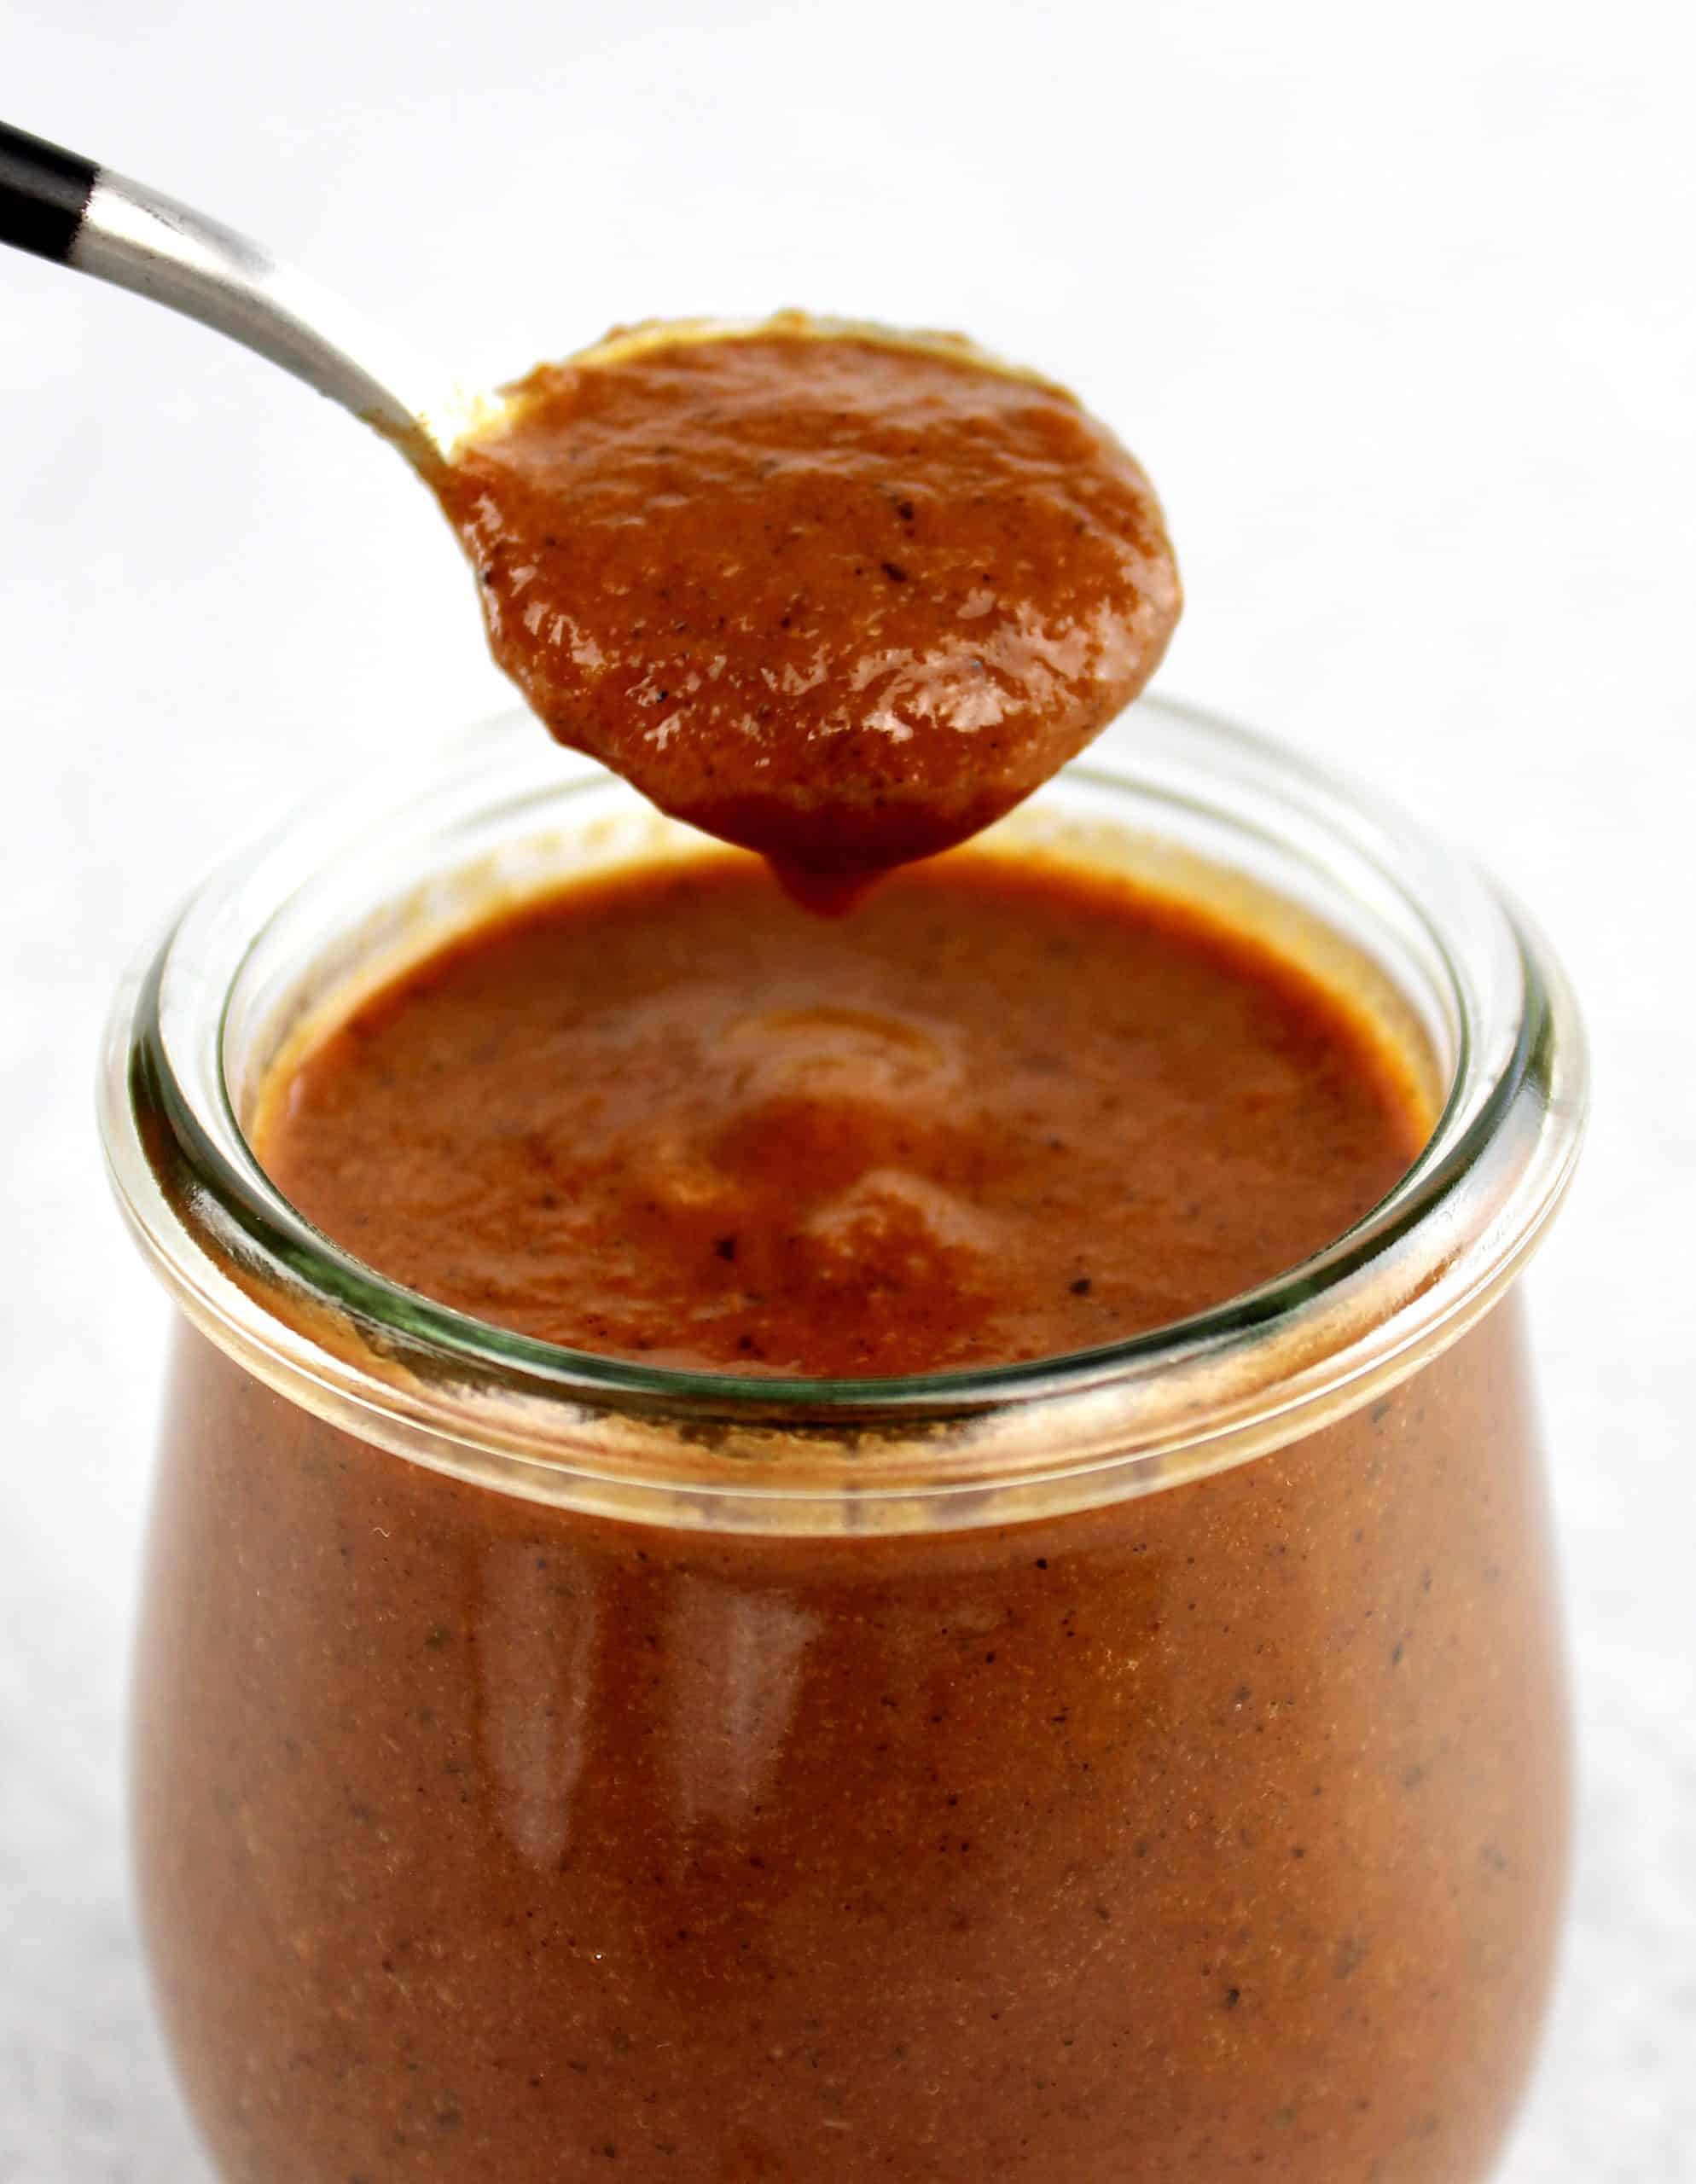 Keto Enchilada Sauce being spooned out of glass jar